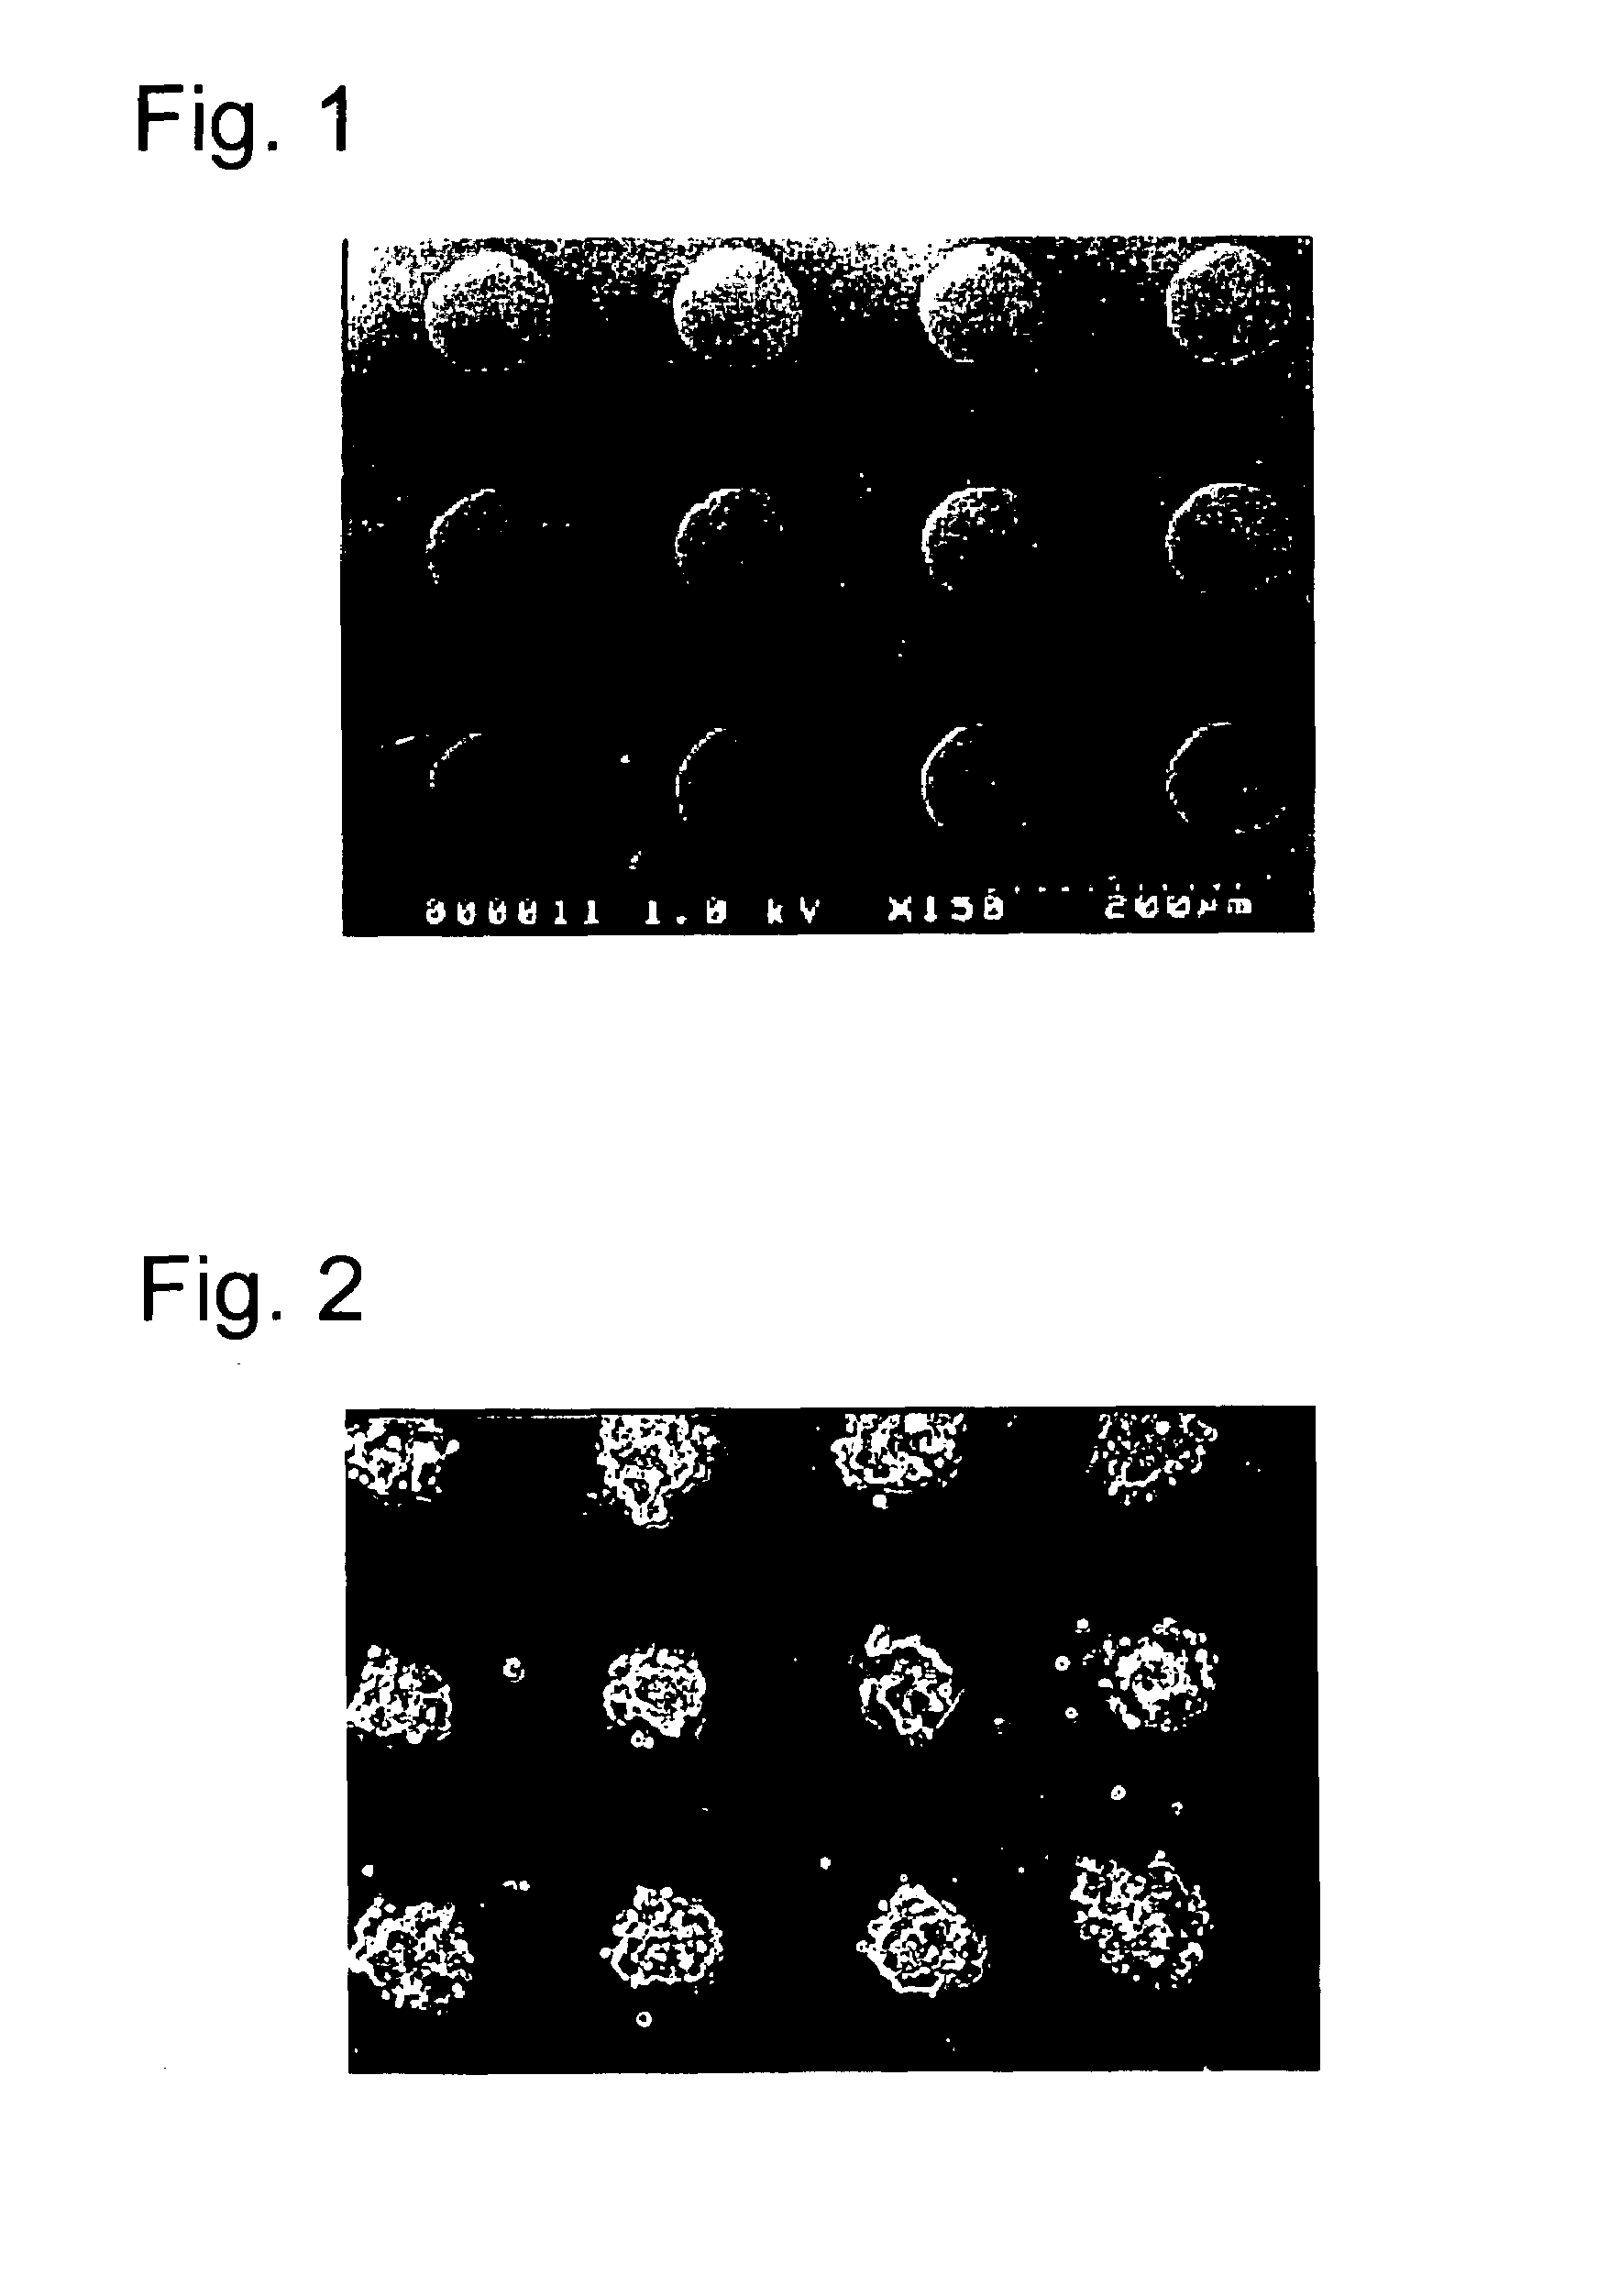 Cultured cell construct containing spheroids of cultured animal cells and utilization thereof